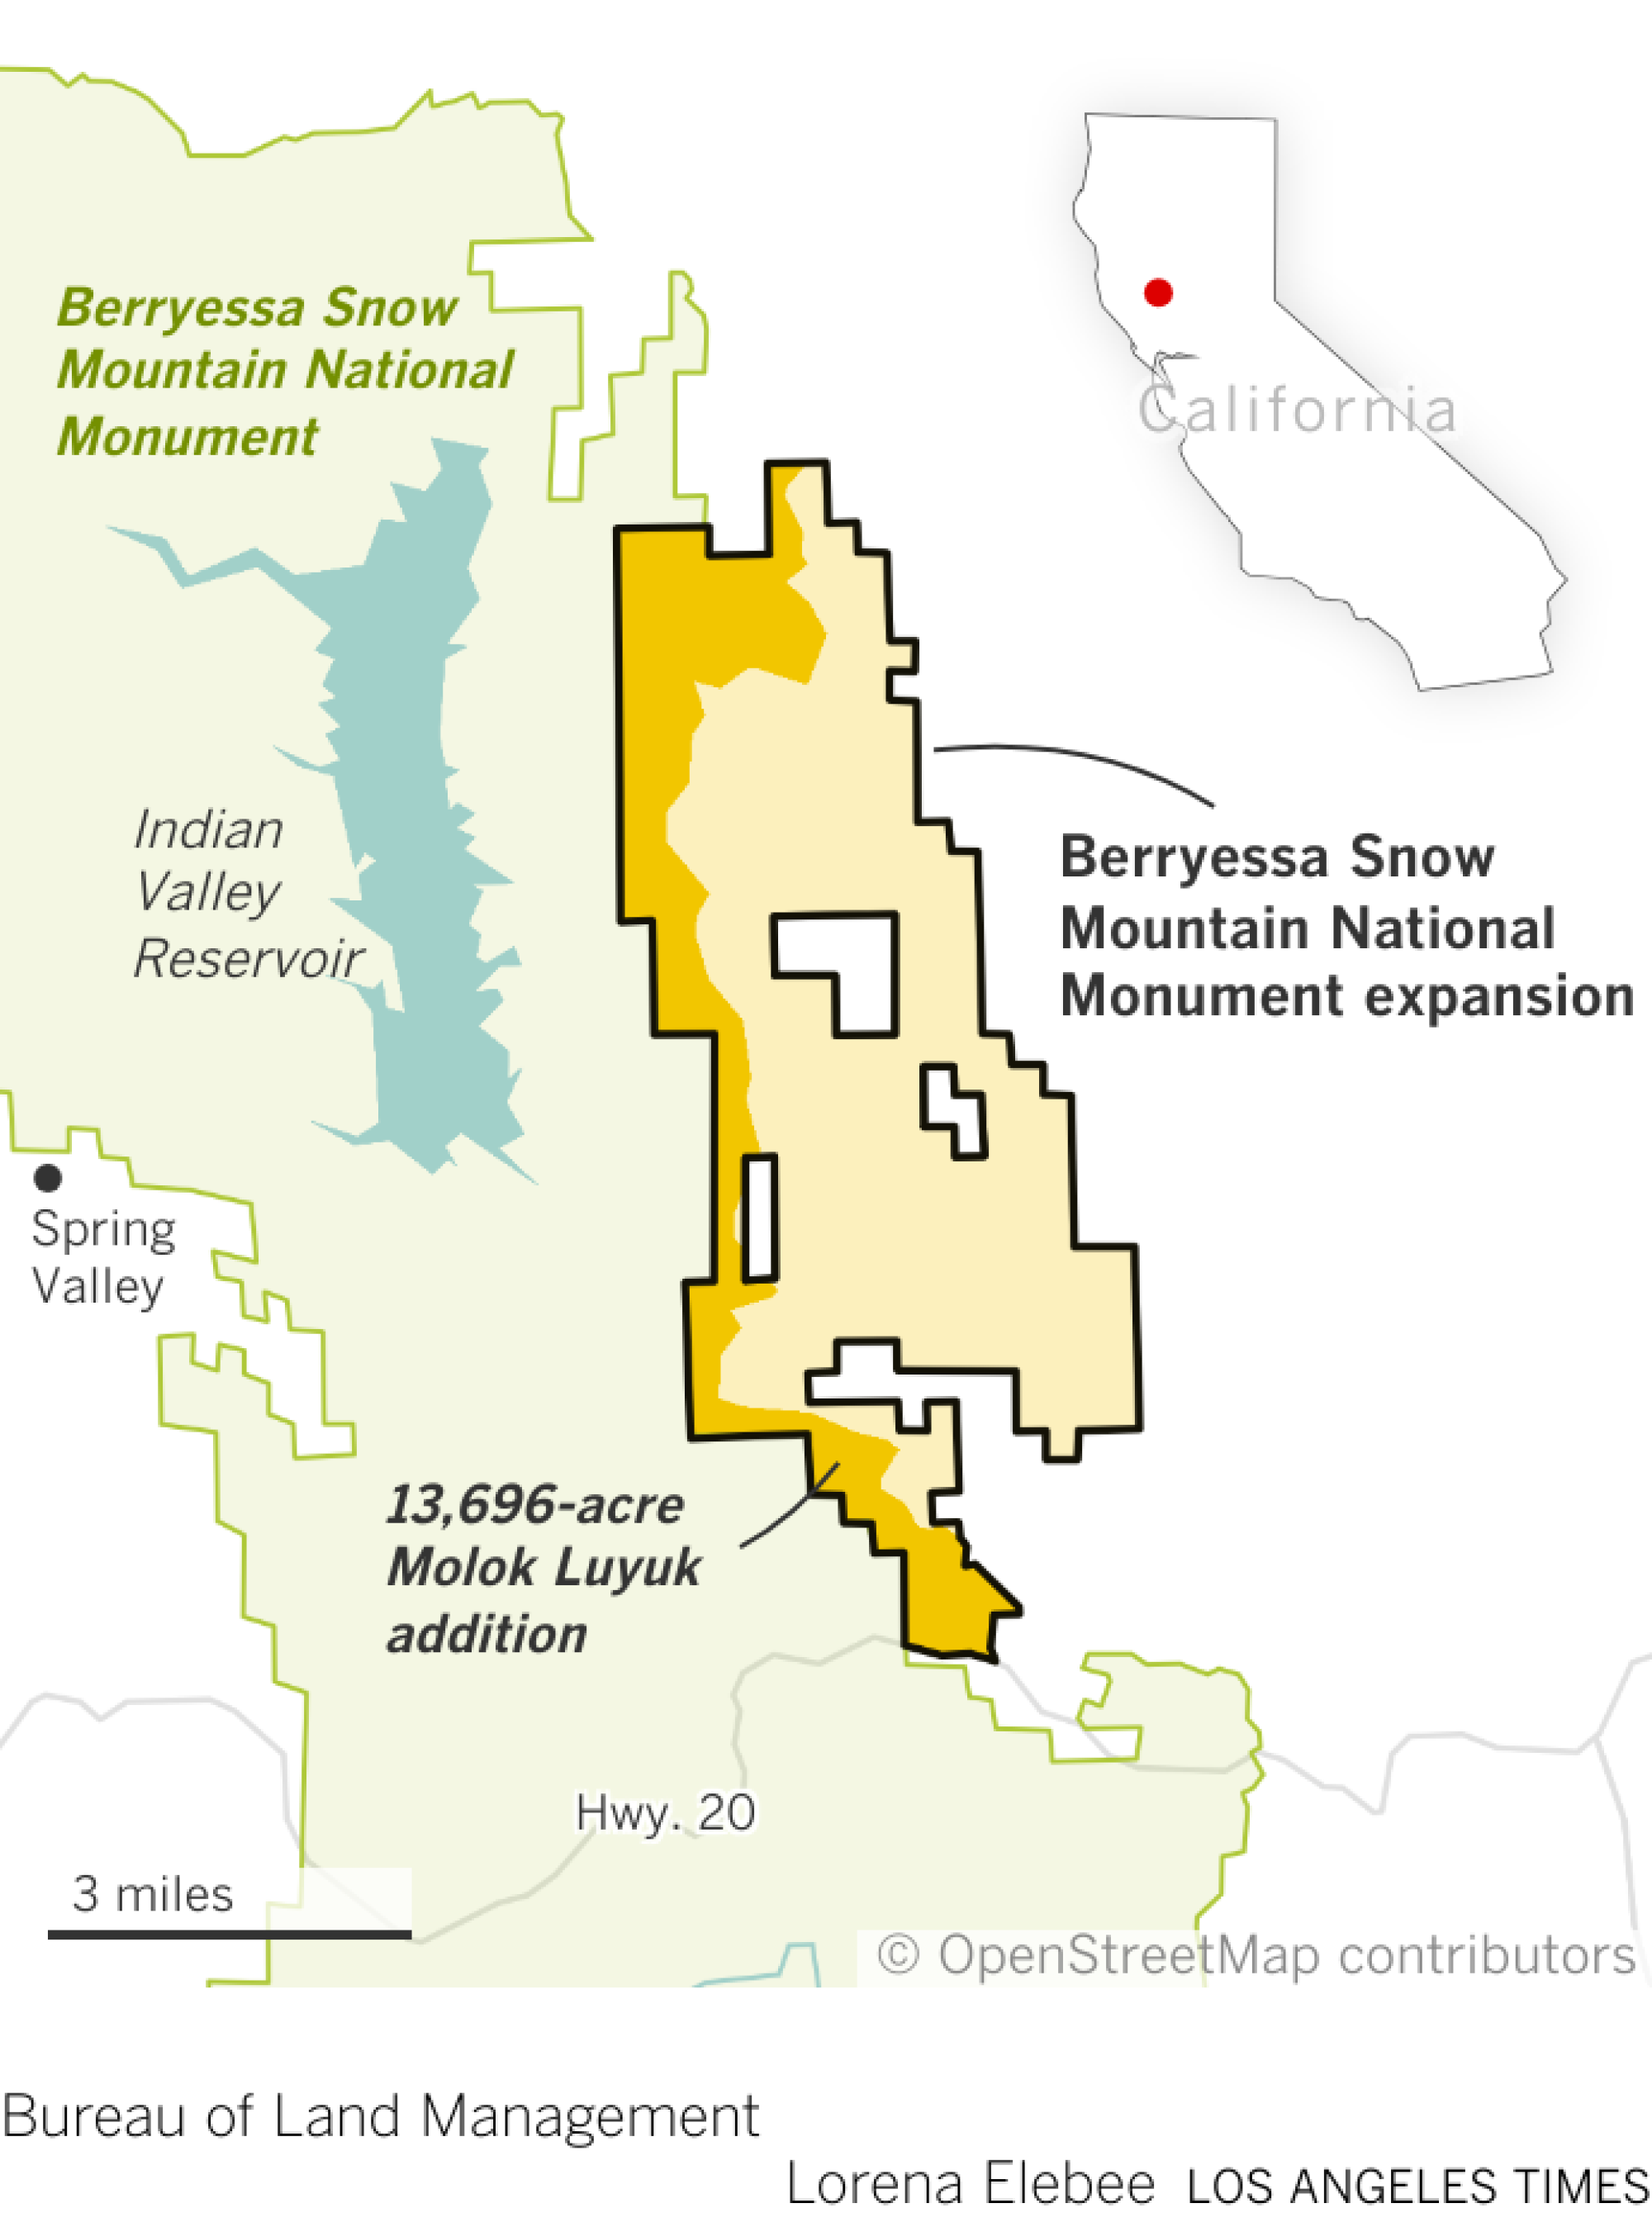 Map showing Berryessa Snow Mountain National Monument expansion.